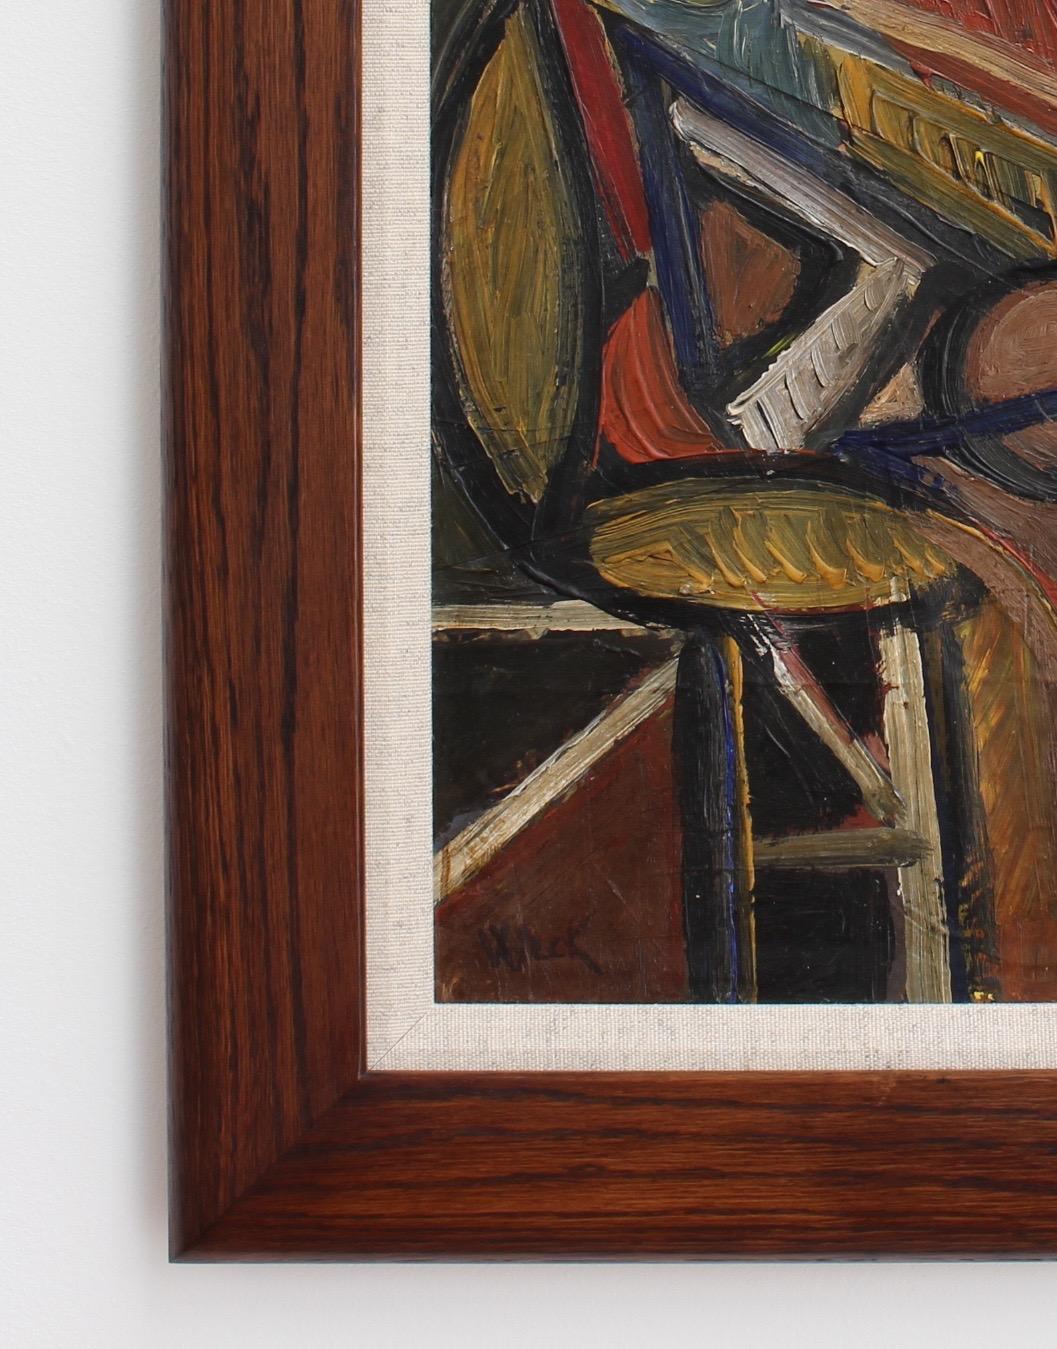 Weck, 'Mother and Child', Midcentury Modern Cubist Oil Portrait Painting, Berlin 2